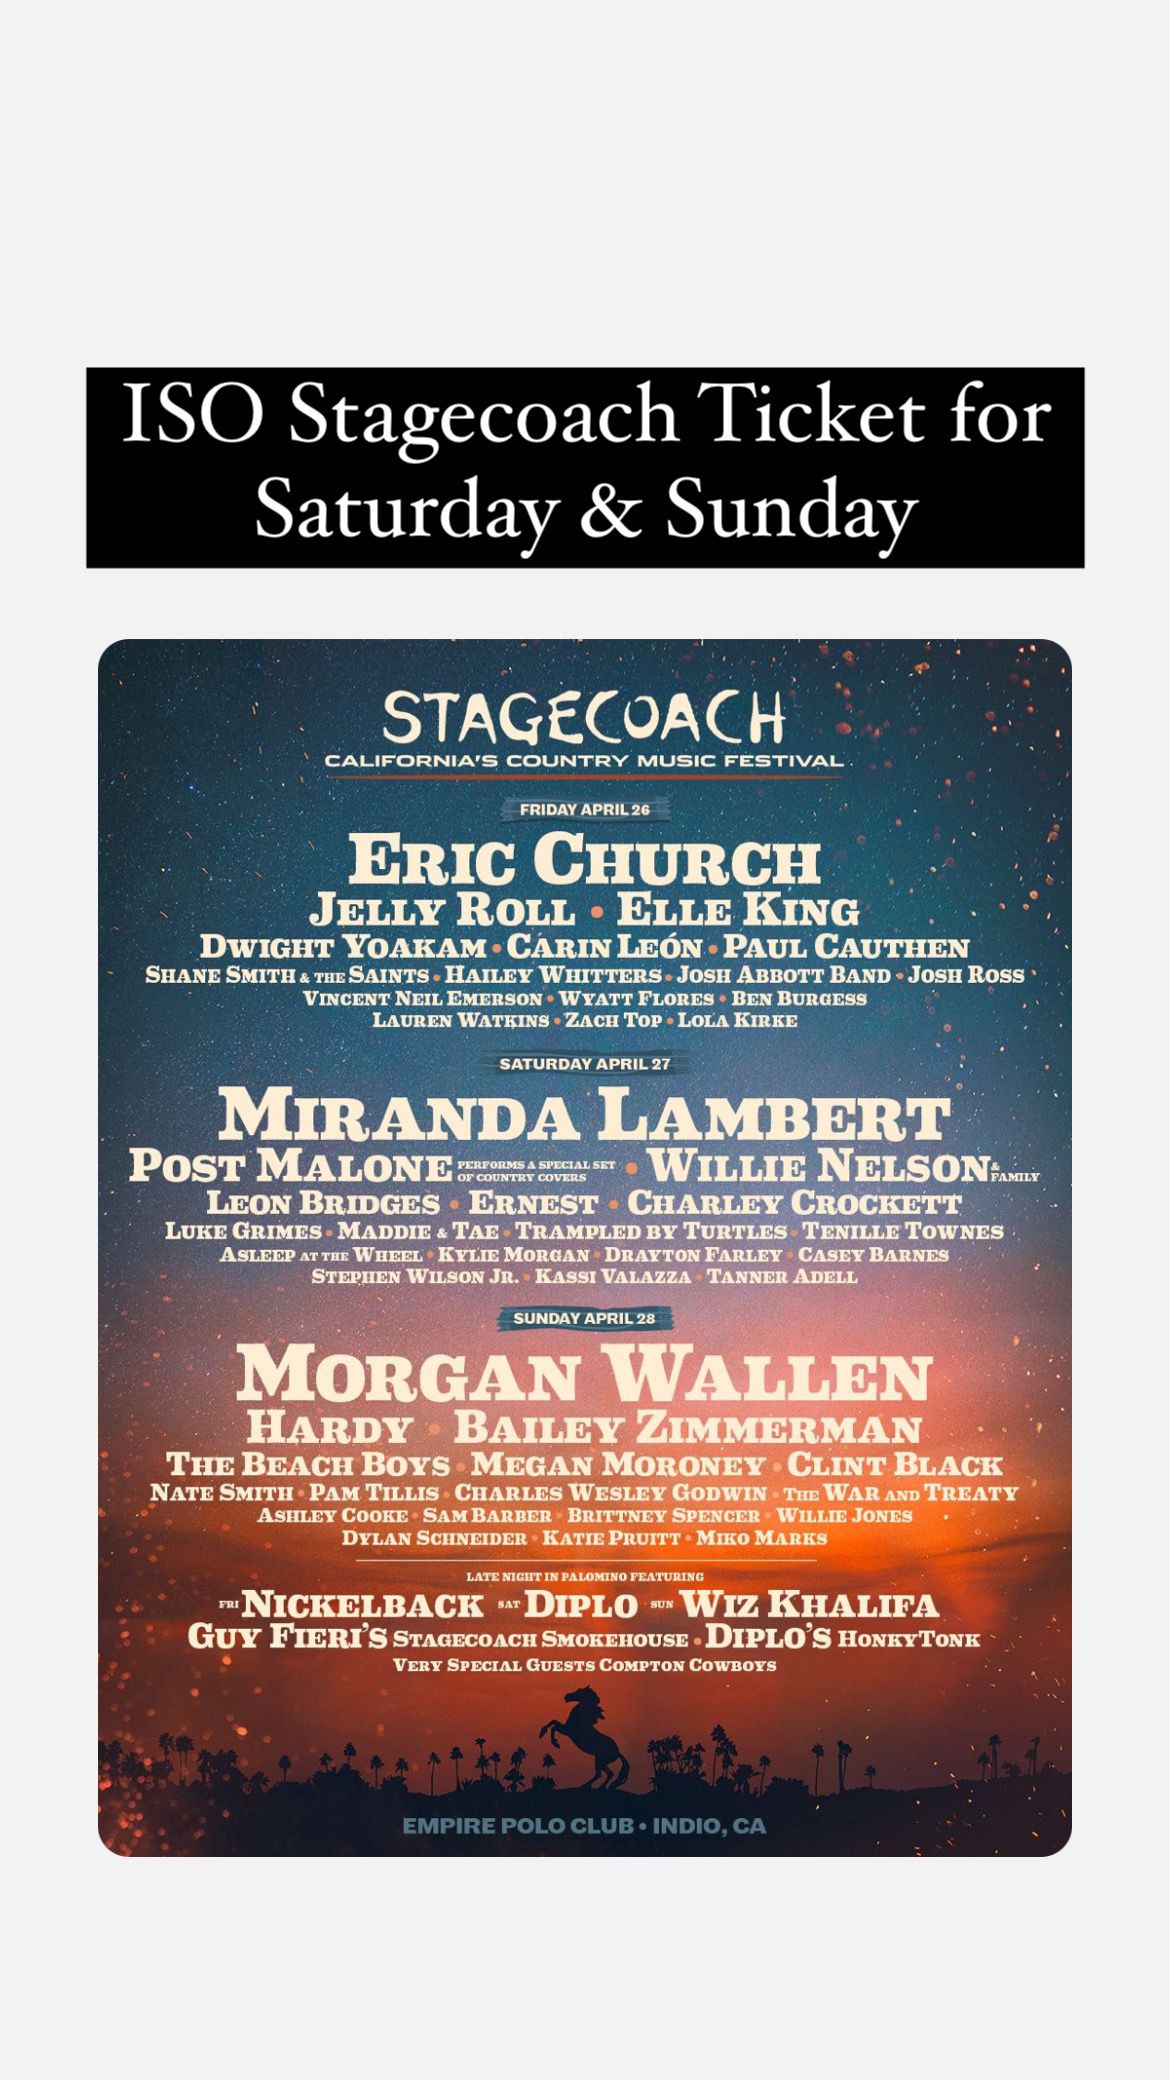 ISO Stagecoach Ticket For Saturday & Sunday 